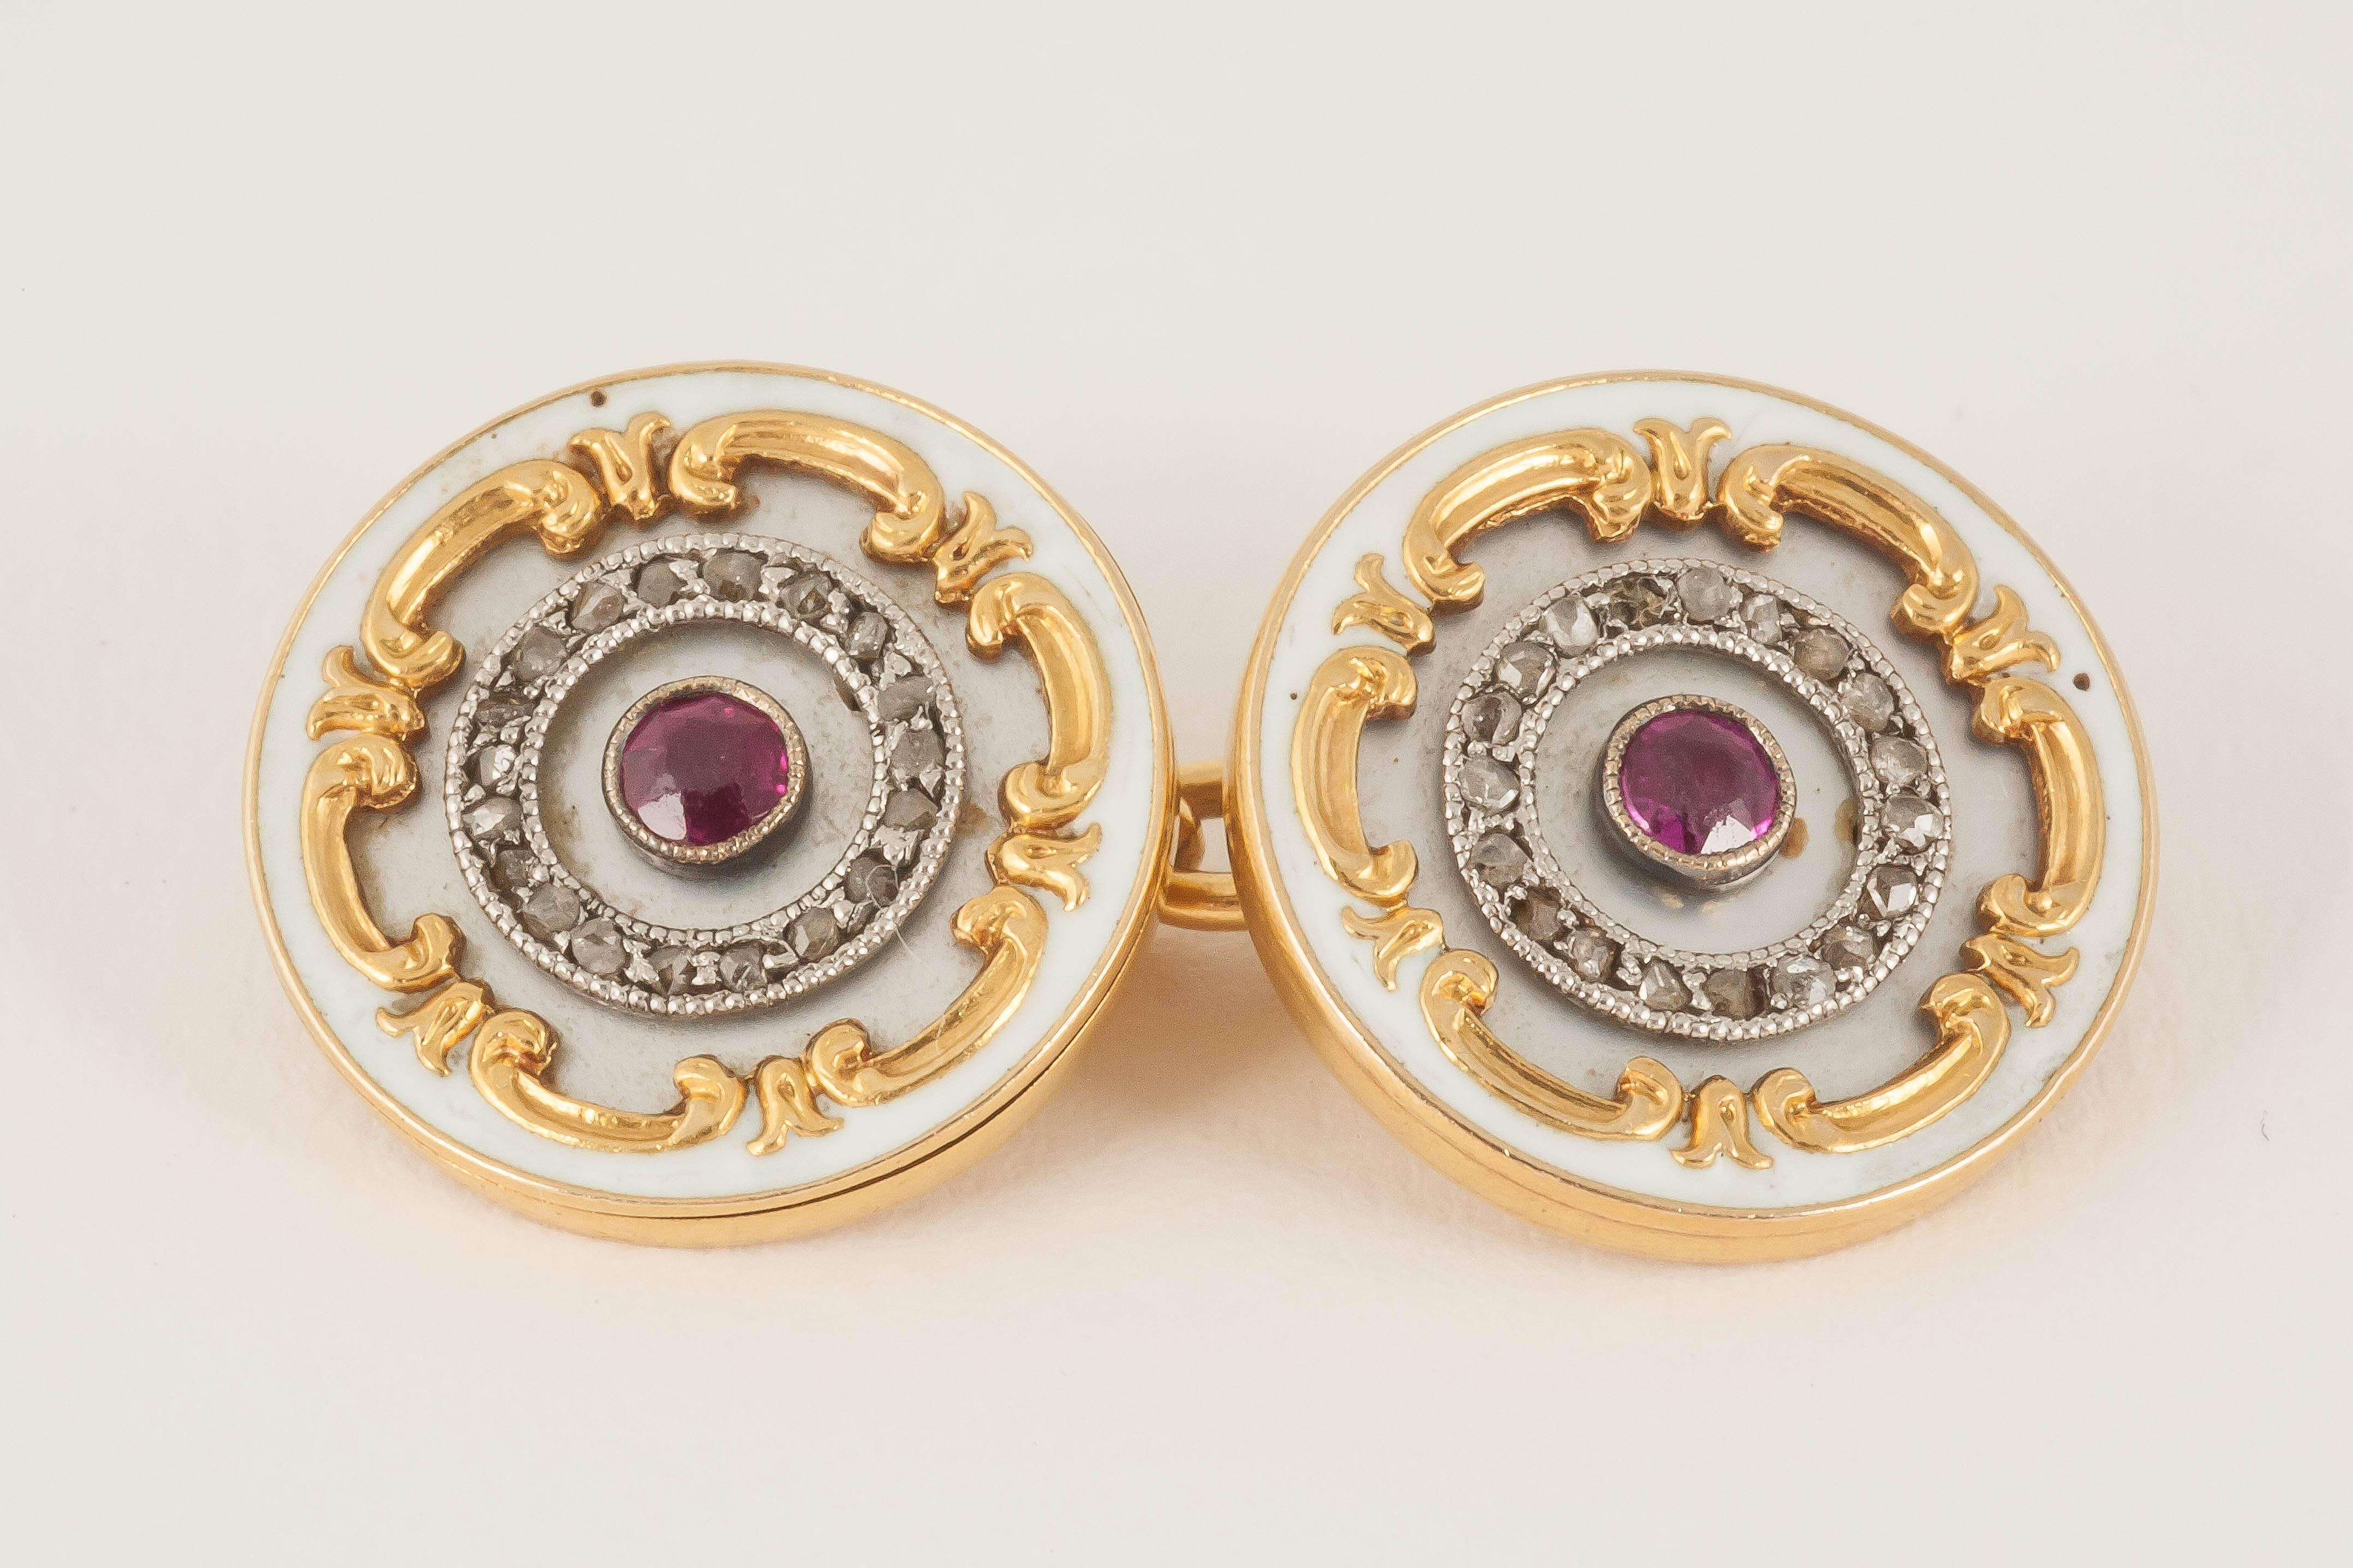 Pair of attractive Art Nouveau 18ct [stamped] yellow gold cufflinks with centre Burma ruby on a mother of pearl background  with rose cut diamonds,gold scrolls and a white enamel border.English c 1900